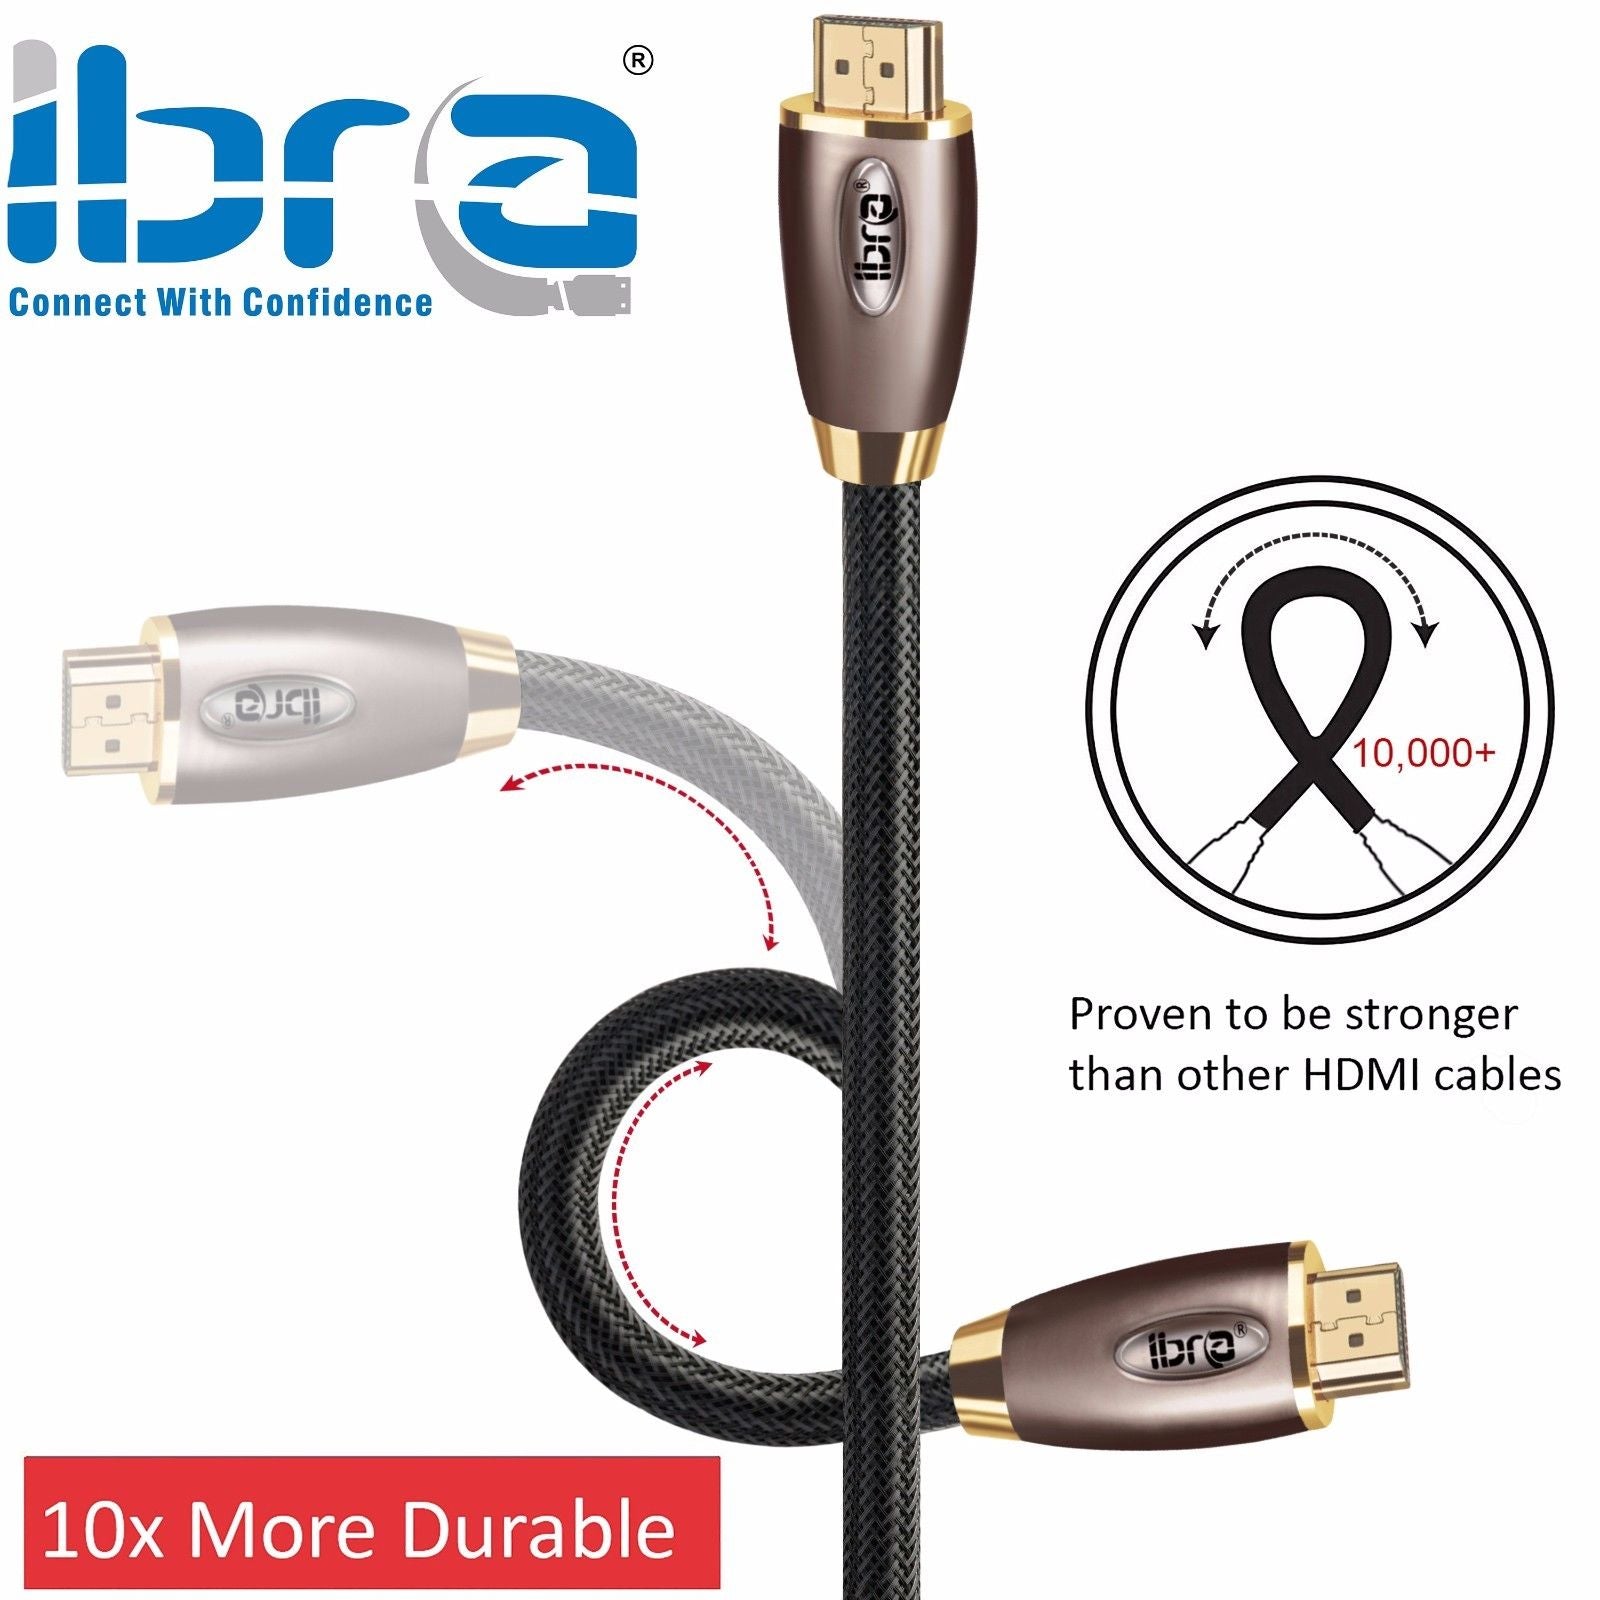 HDMI Cable 7.5M - 4K UHD HDMI 2.0(4K@60Hz) Ready -18Gbps-28AWG Braided Cord -Gold Plated Connectors -Ethernet,Audio Return -Video 4K 2160p,HD 1080p,3D -Xbox PlayStation PS3 PS4 PC Apple TV -IBRA RED